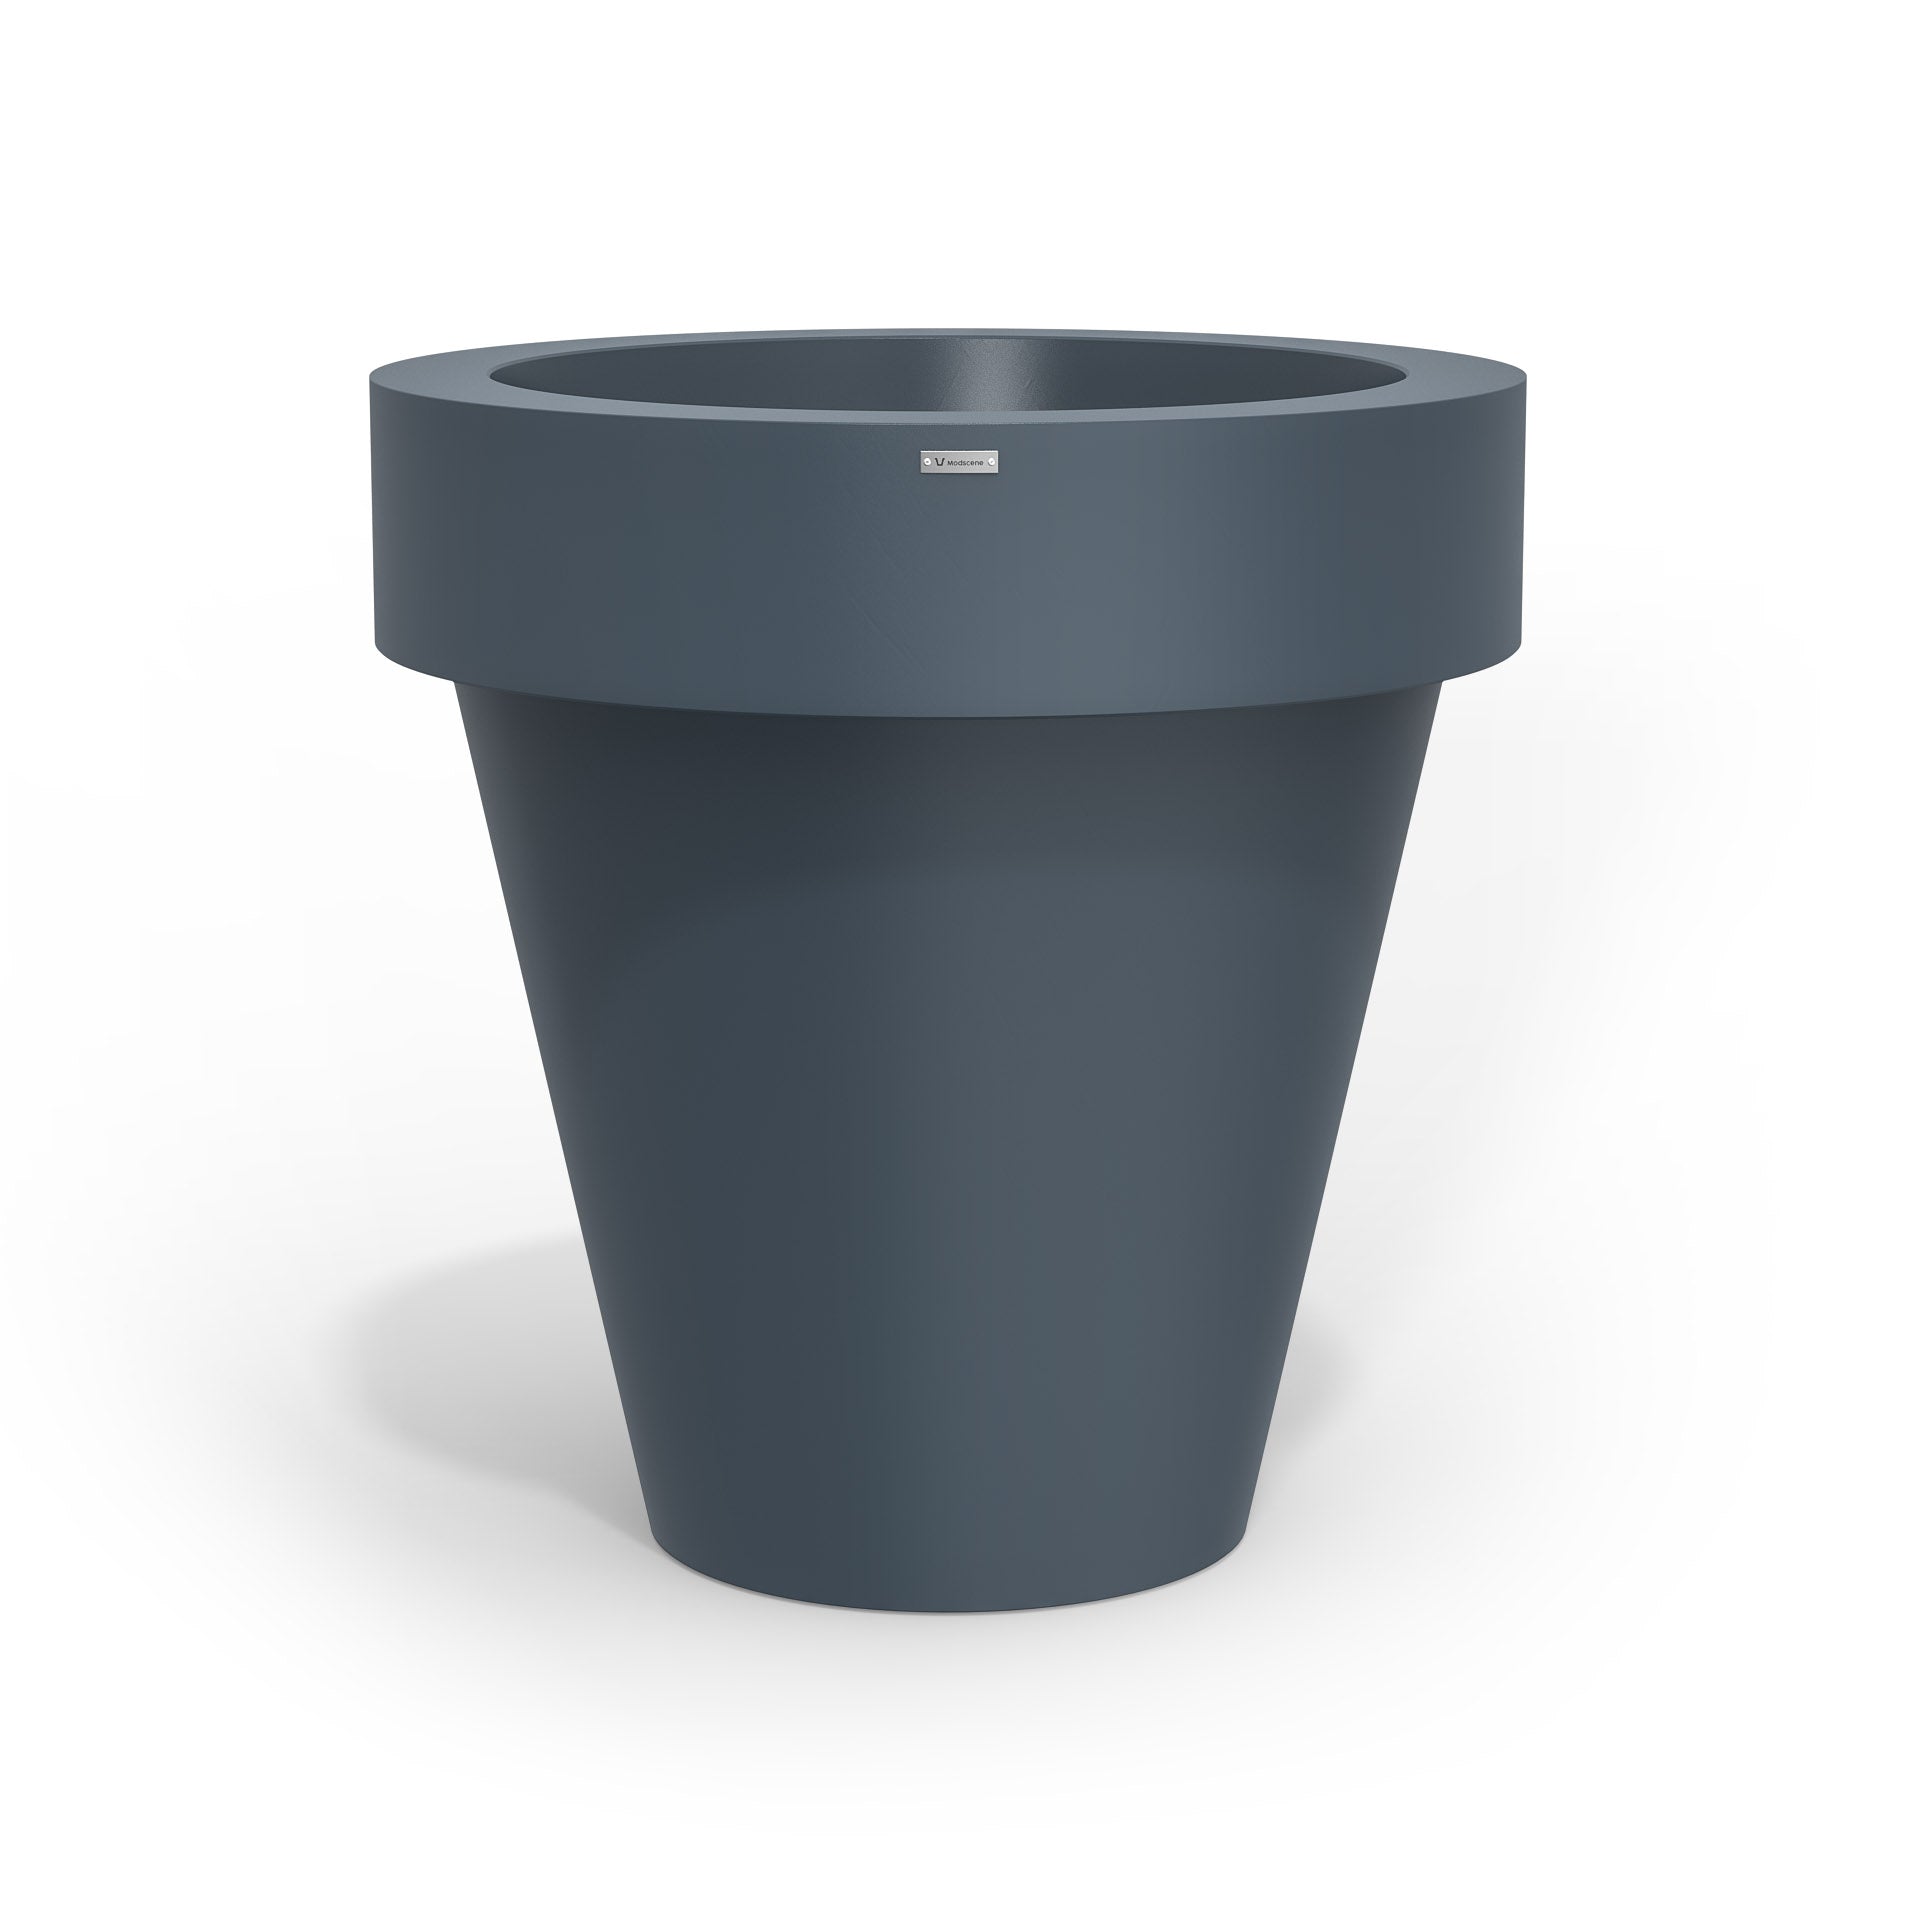 Extra large Modscene planter pot in a dark grey colour. Made in NZ.